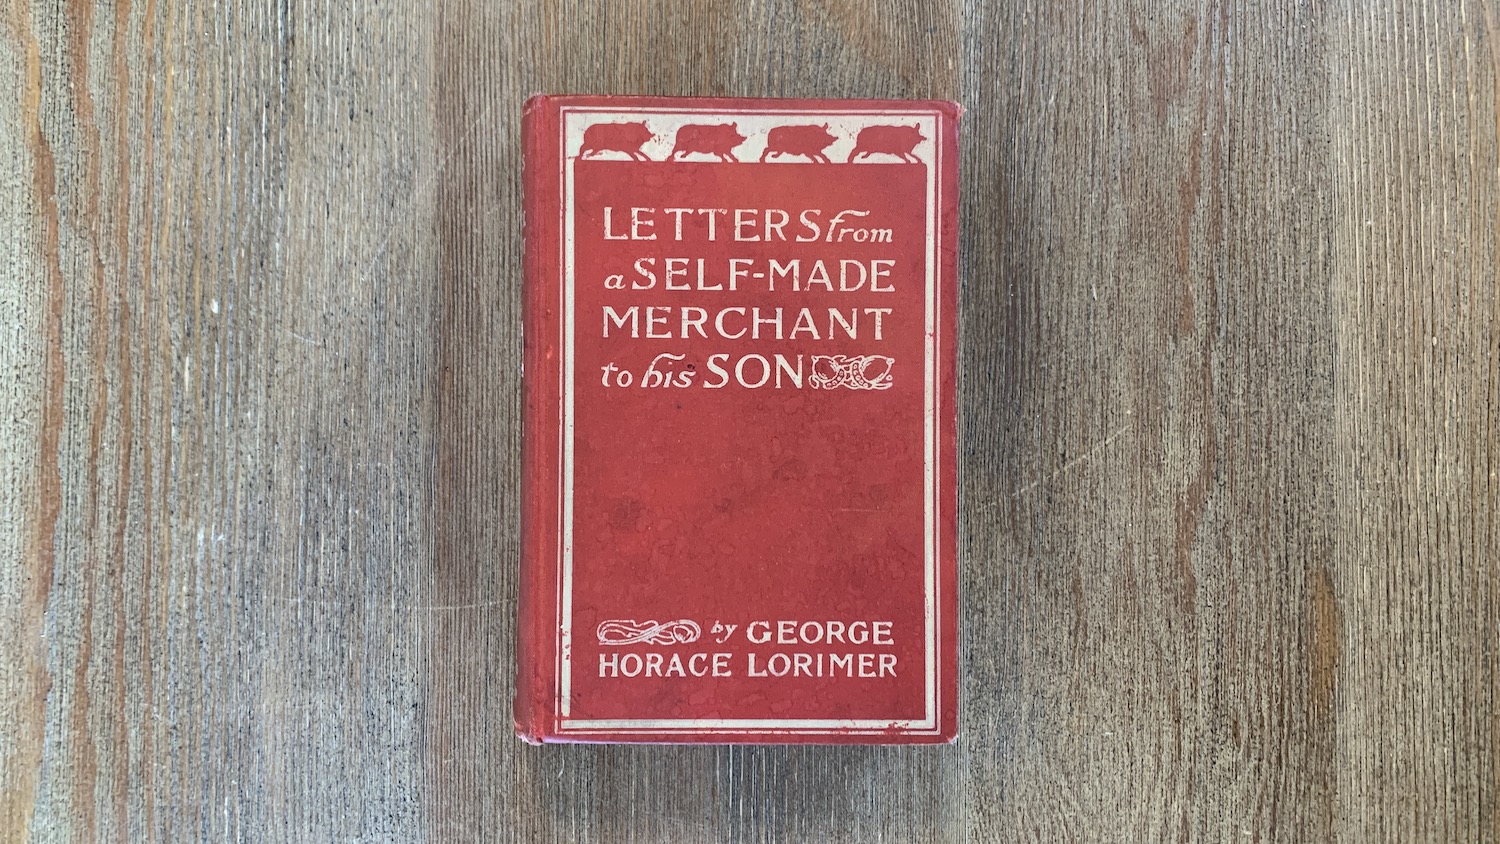 the book 'Letters from a Self Made Merchant to His Son'